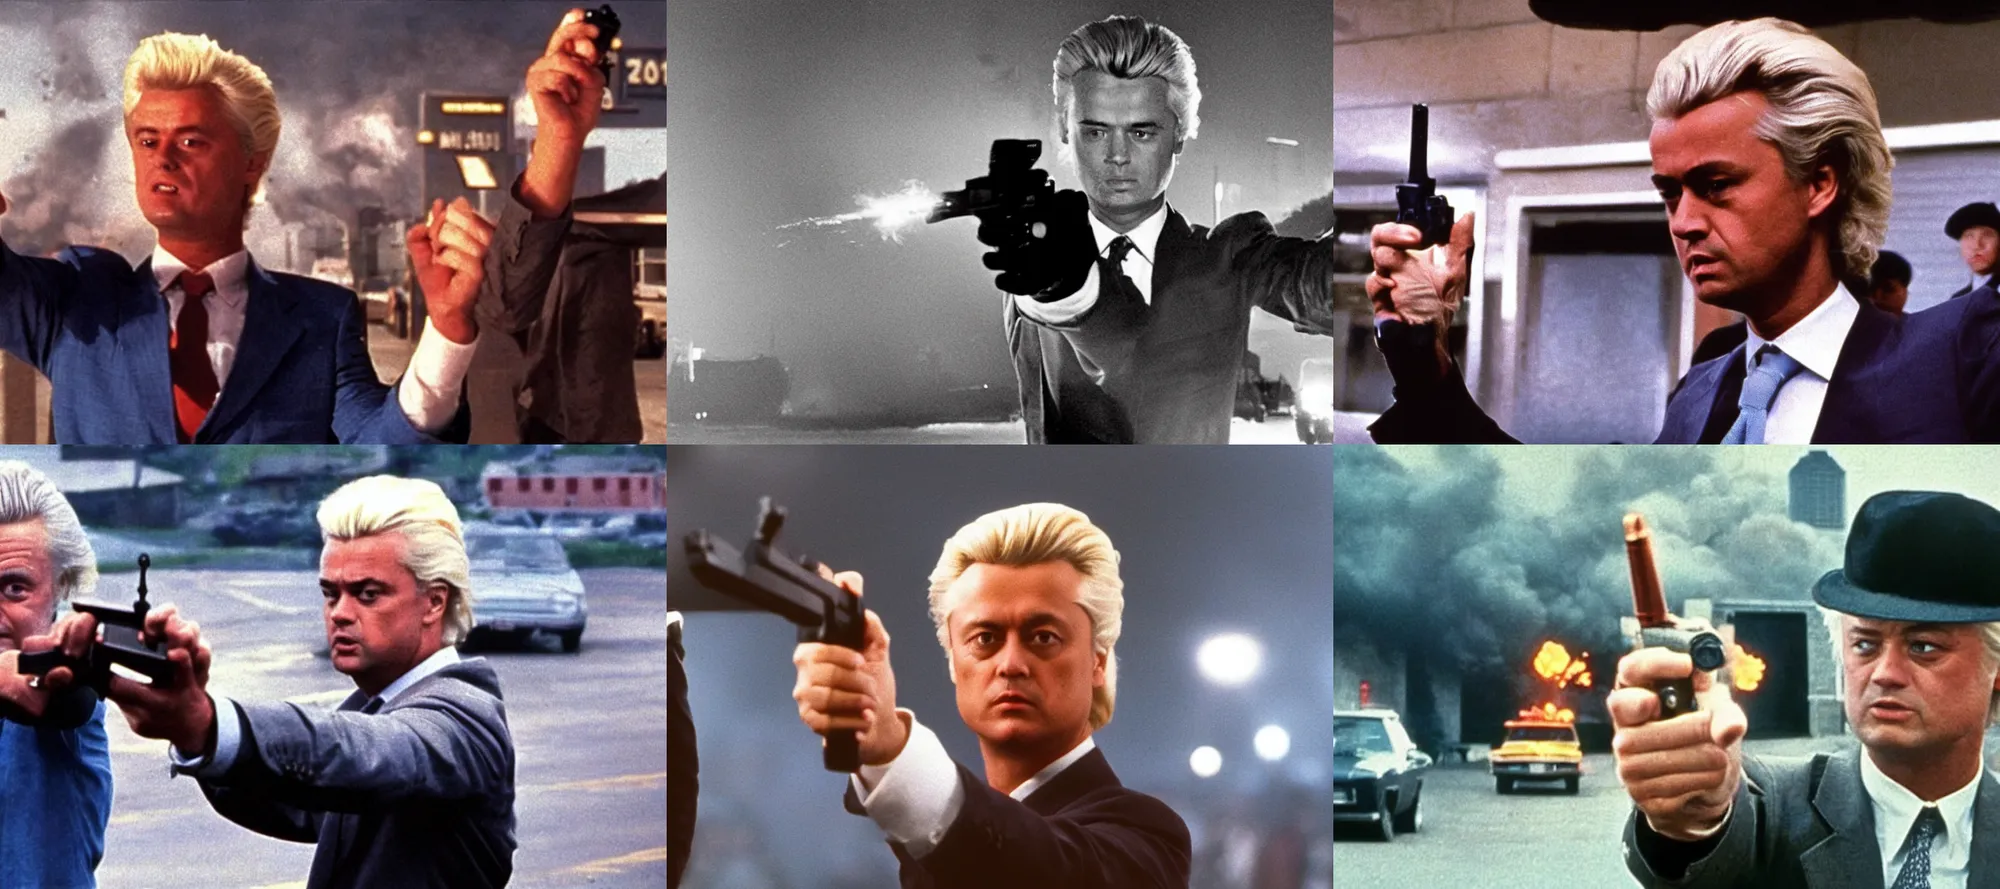 Prompt: Geert Wilders pointing a pistol at the camera, explosion in the background, in a scene from the movie Hard Boiled 1992 directed by John Woo